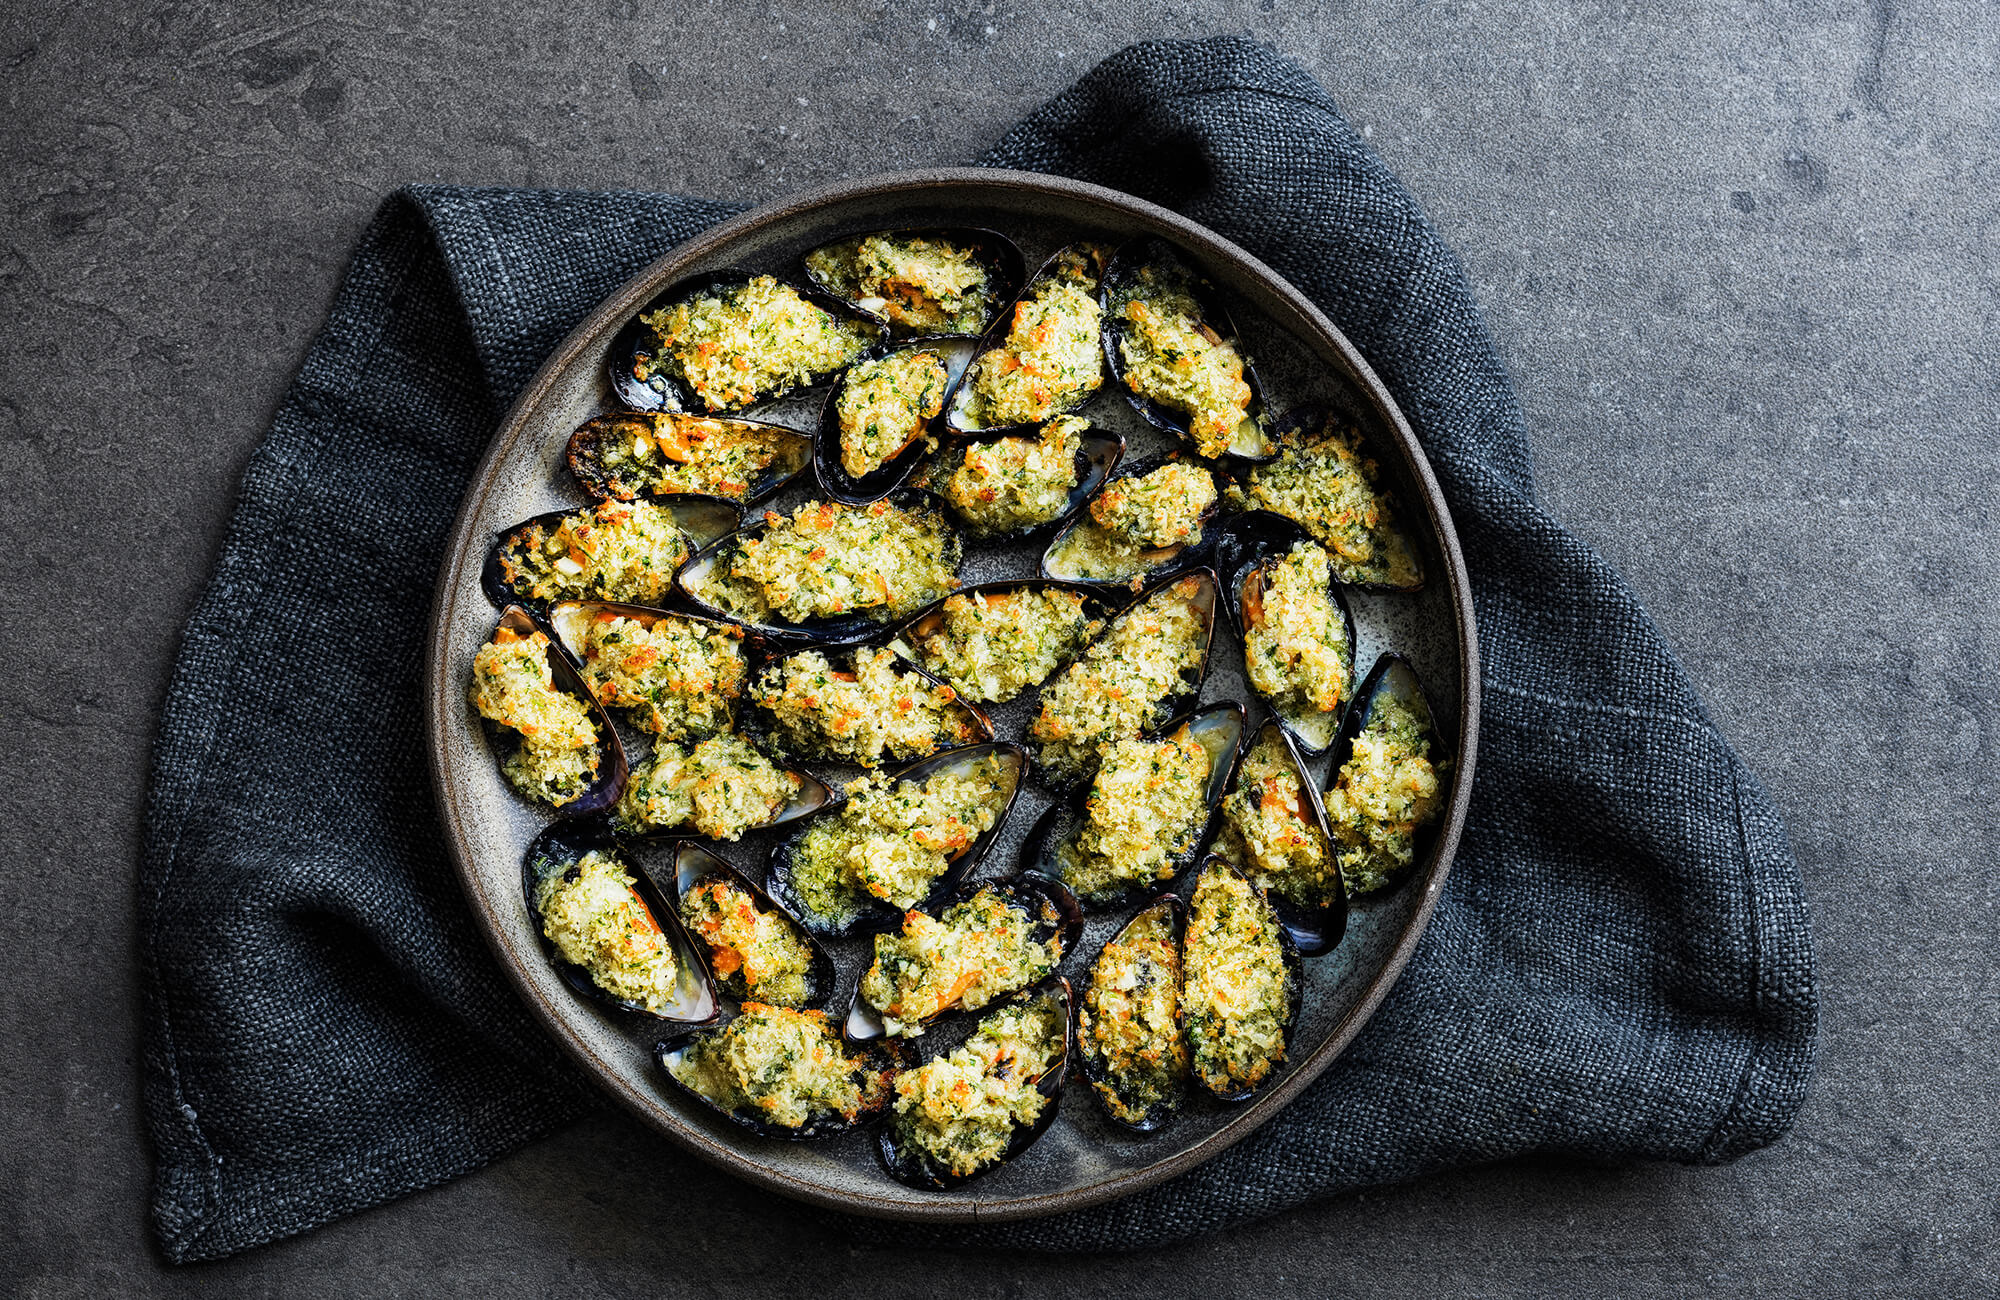 Gratinated-mussels-2000x1300-compresed.jpg